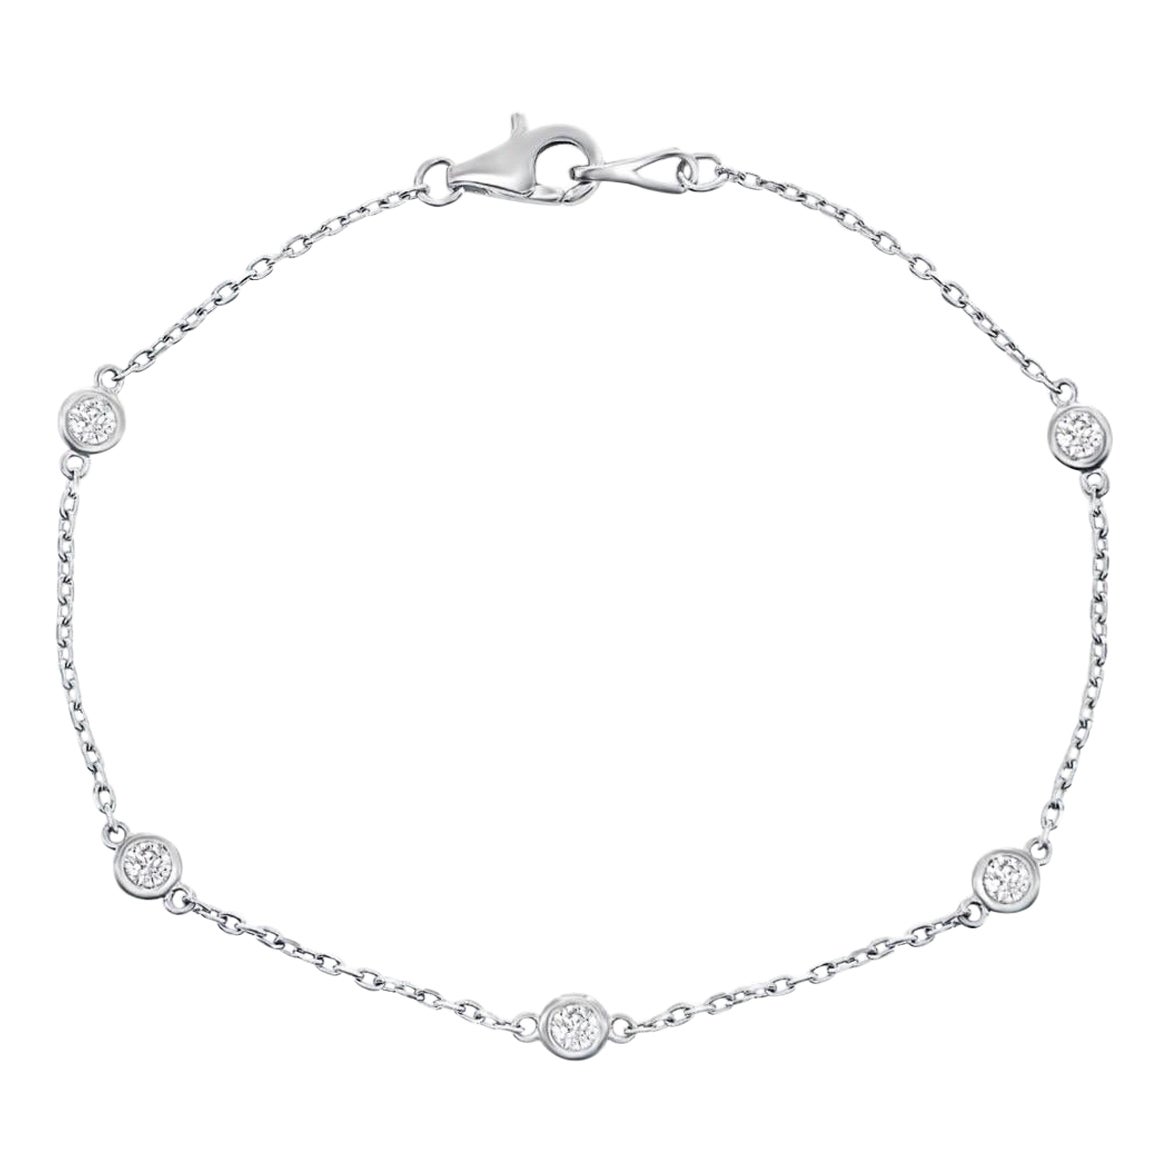 Diamond By The Yards Bracelet in 14k White Gold With 5 Natural Diamonds For Sale